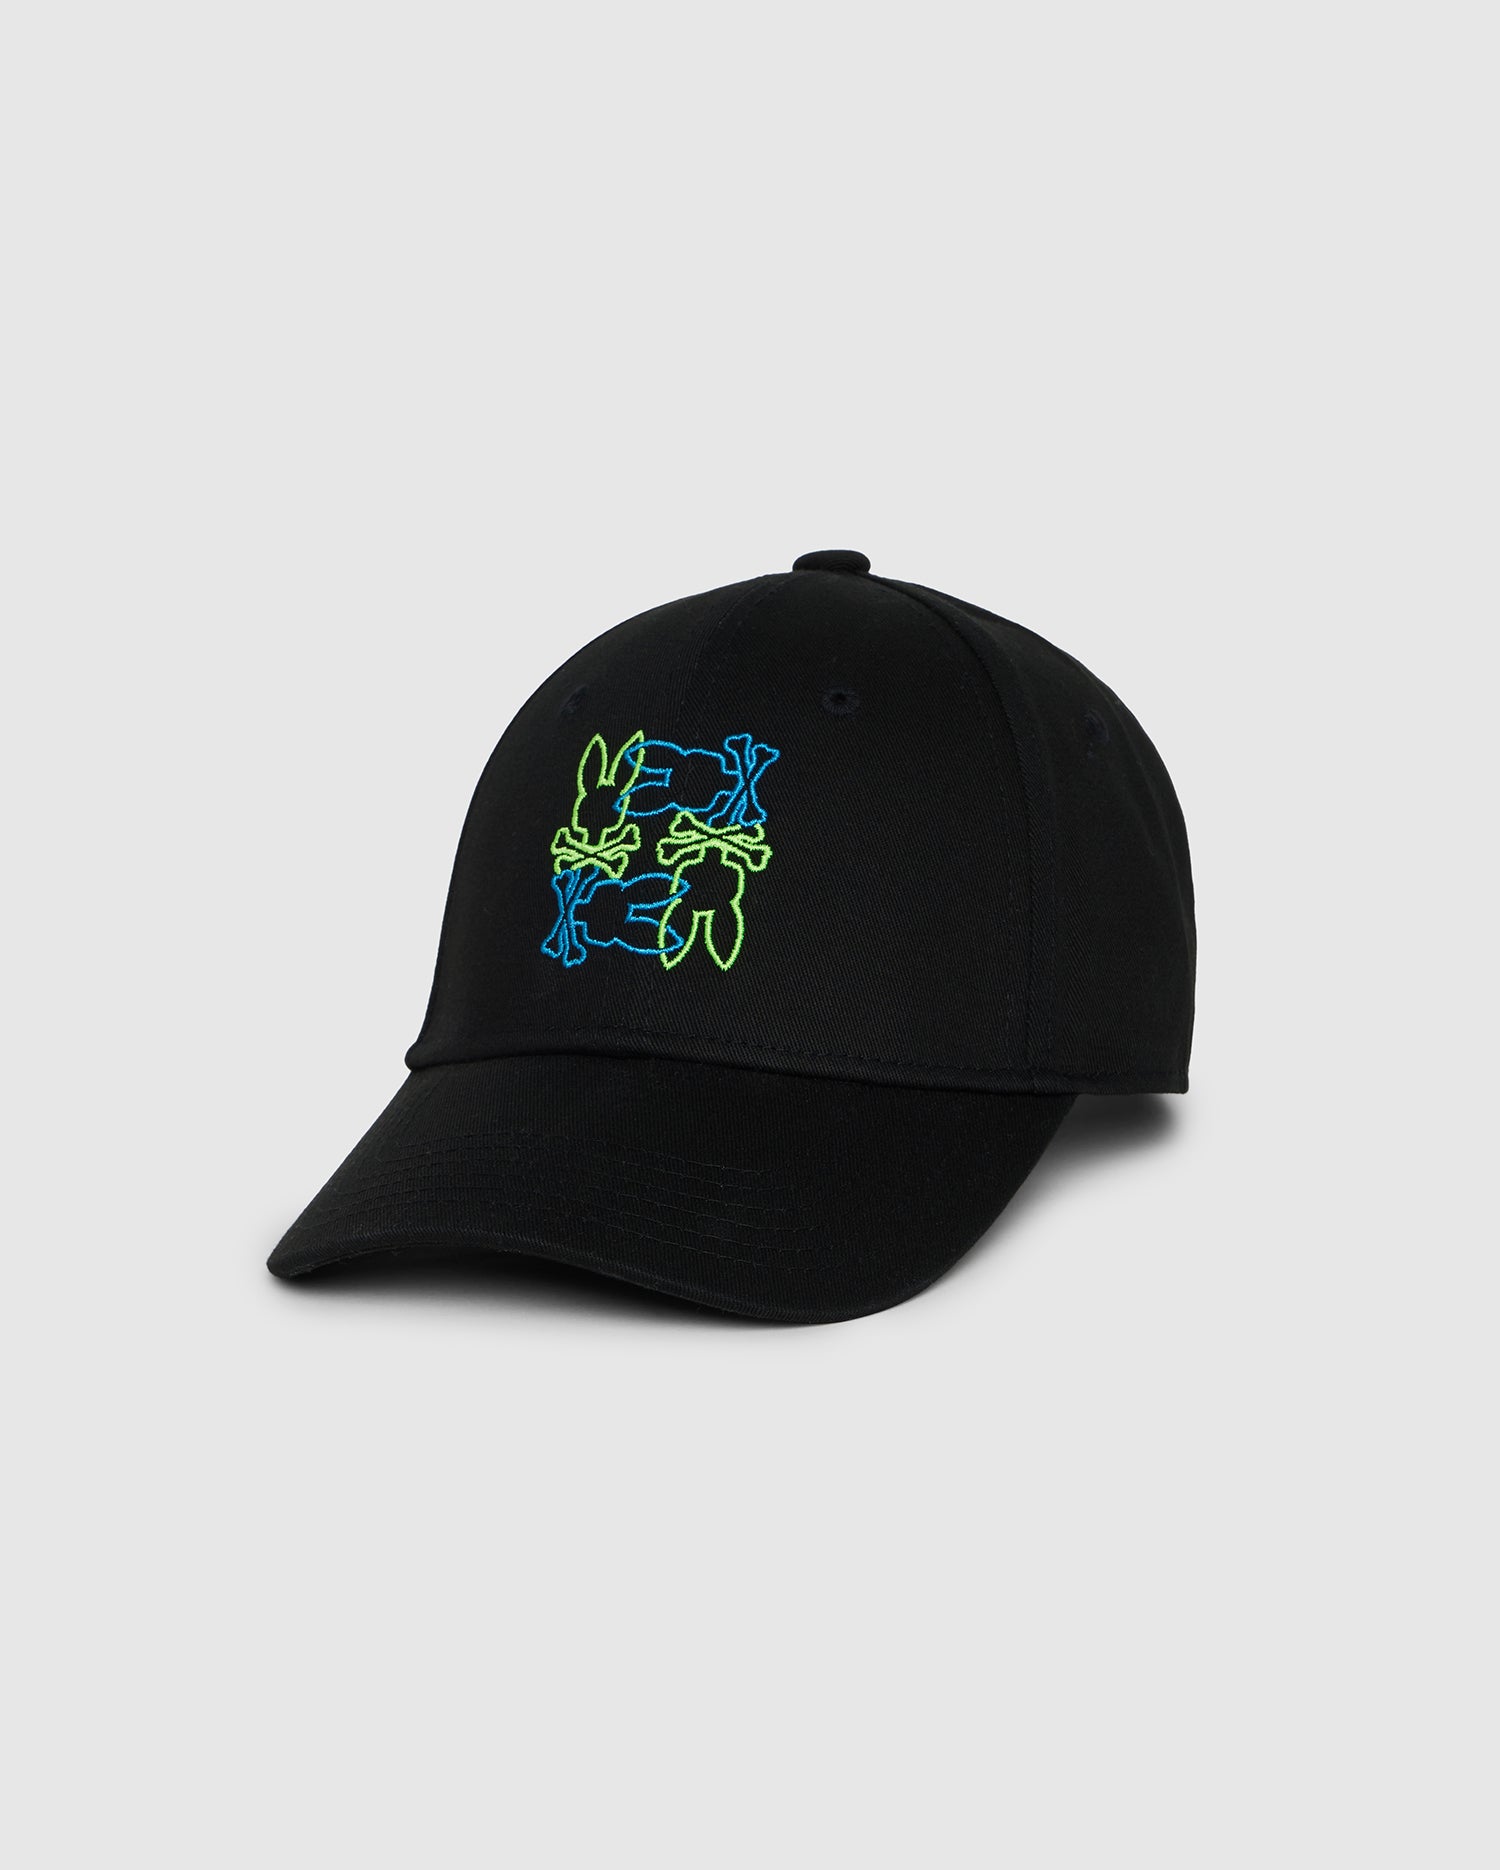 The KIDS RODMAN BASEBALL CAP - B0A124B2HT by Psycho Bunny, a versatile wardrobe accessory, features a colorful, abstract embroidery design of blue and green lines forming stylized shapes on the front. The headgear has a curved brim and an adjustable strap at the back, set against a plain white background.